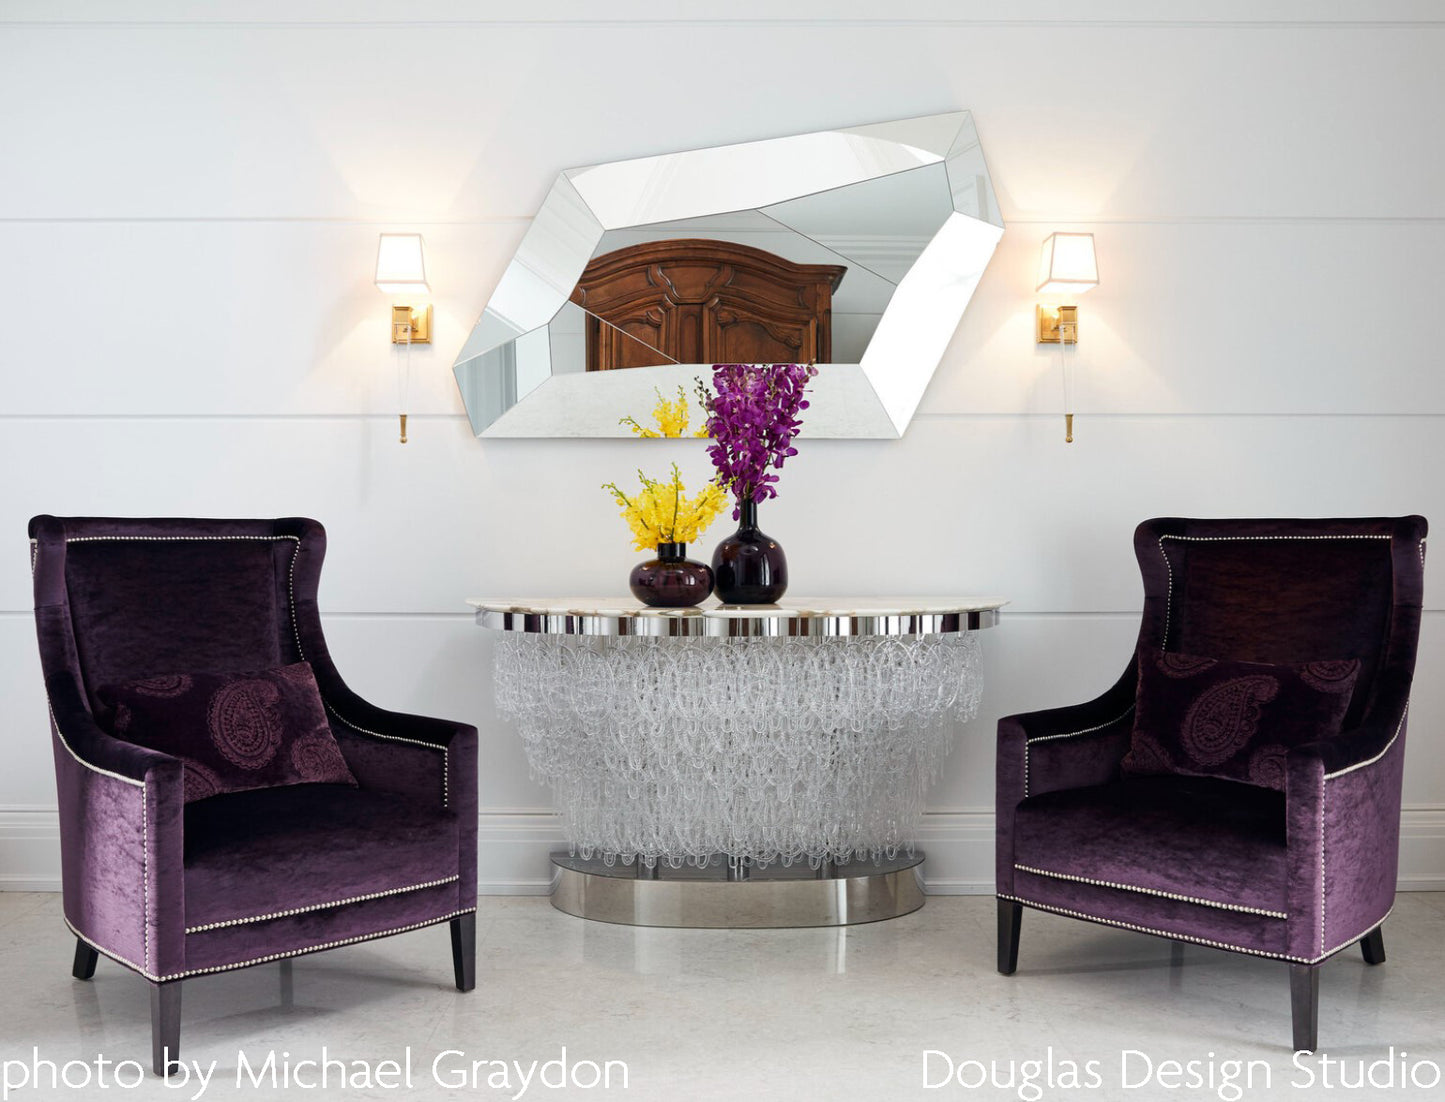 Crystal sconces with antique brass trim by mirror and purple chairs.